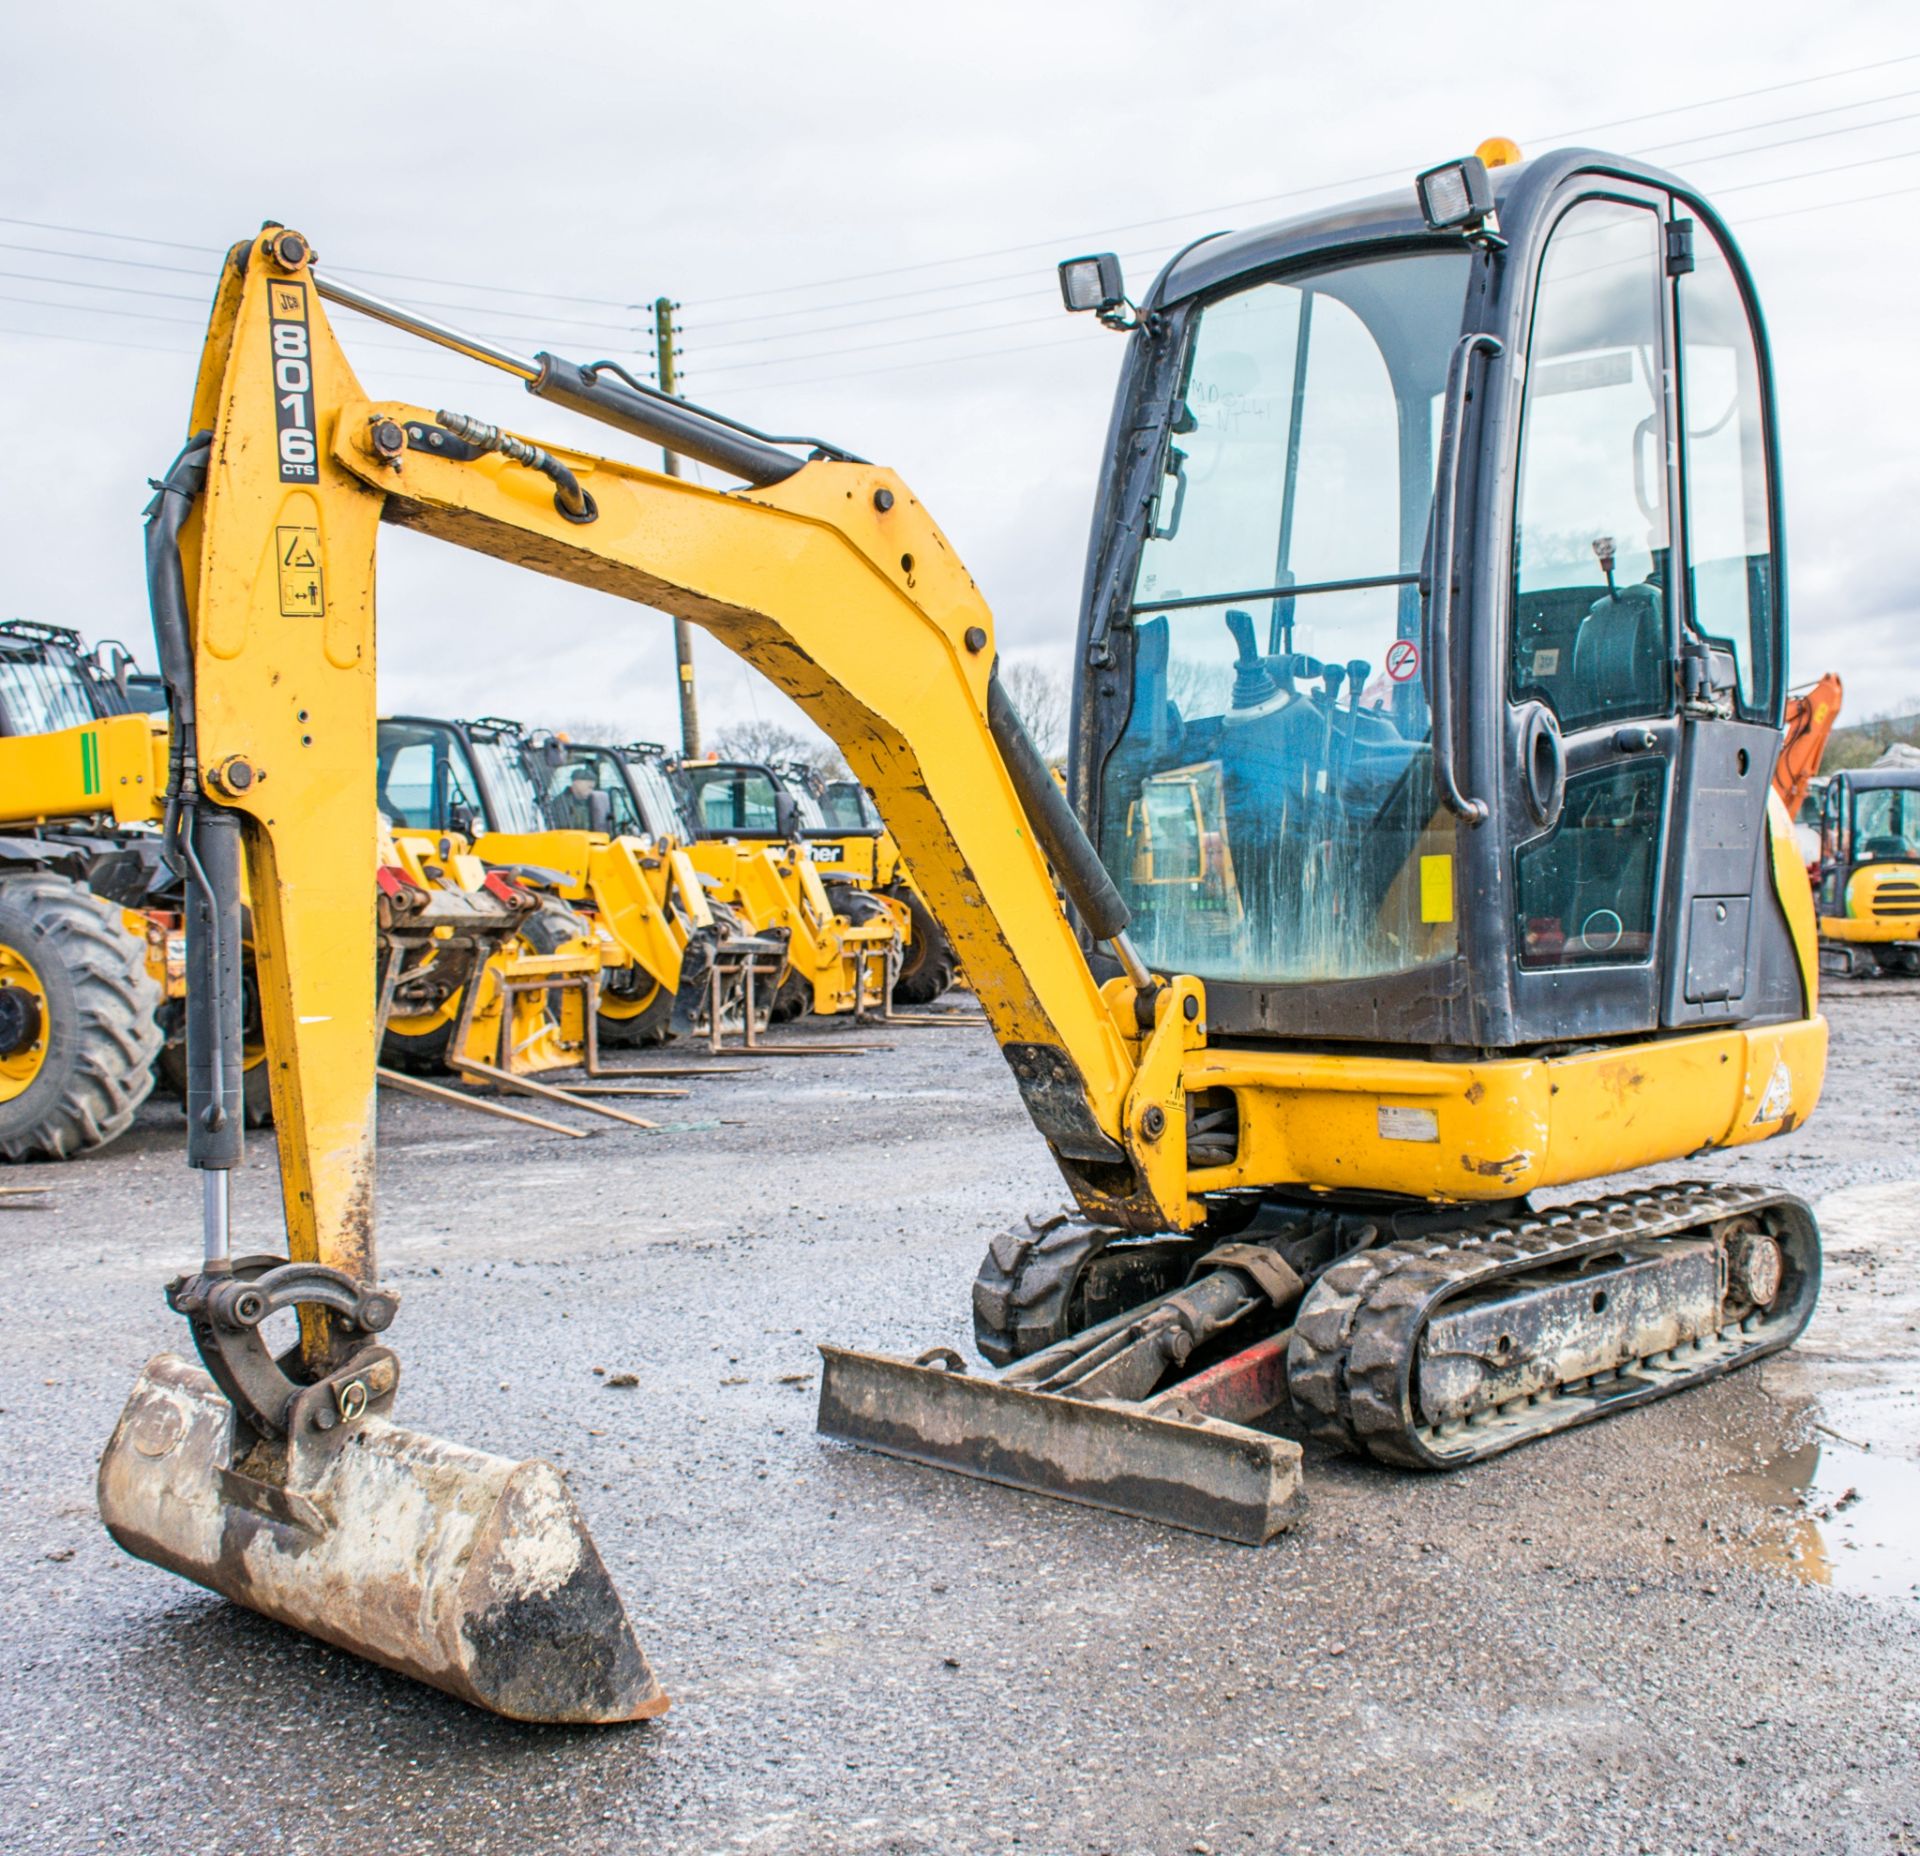 JCB 801.6 CTS 1.5 tonne rubber tracked mini excavator Year: 2013 S/N: 20171420 Recorded Hours: